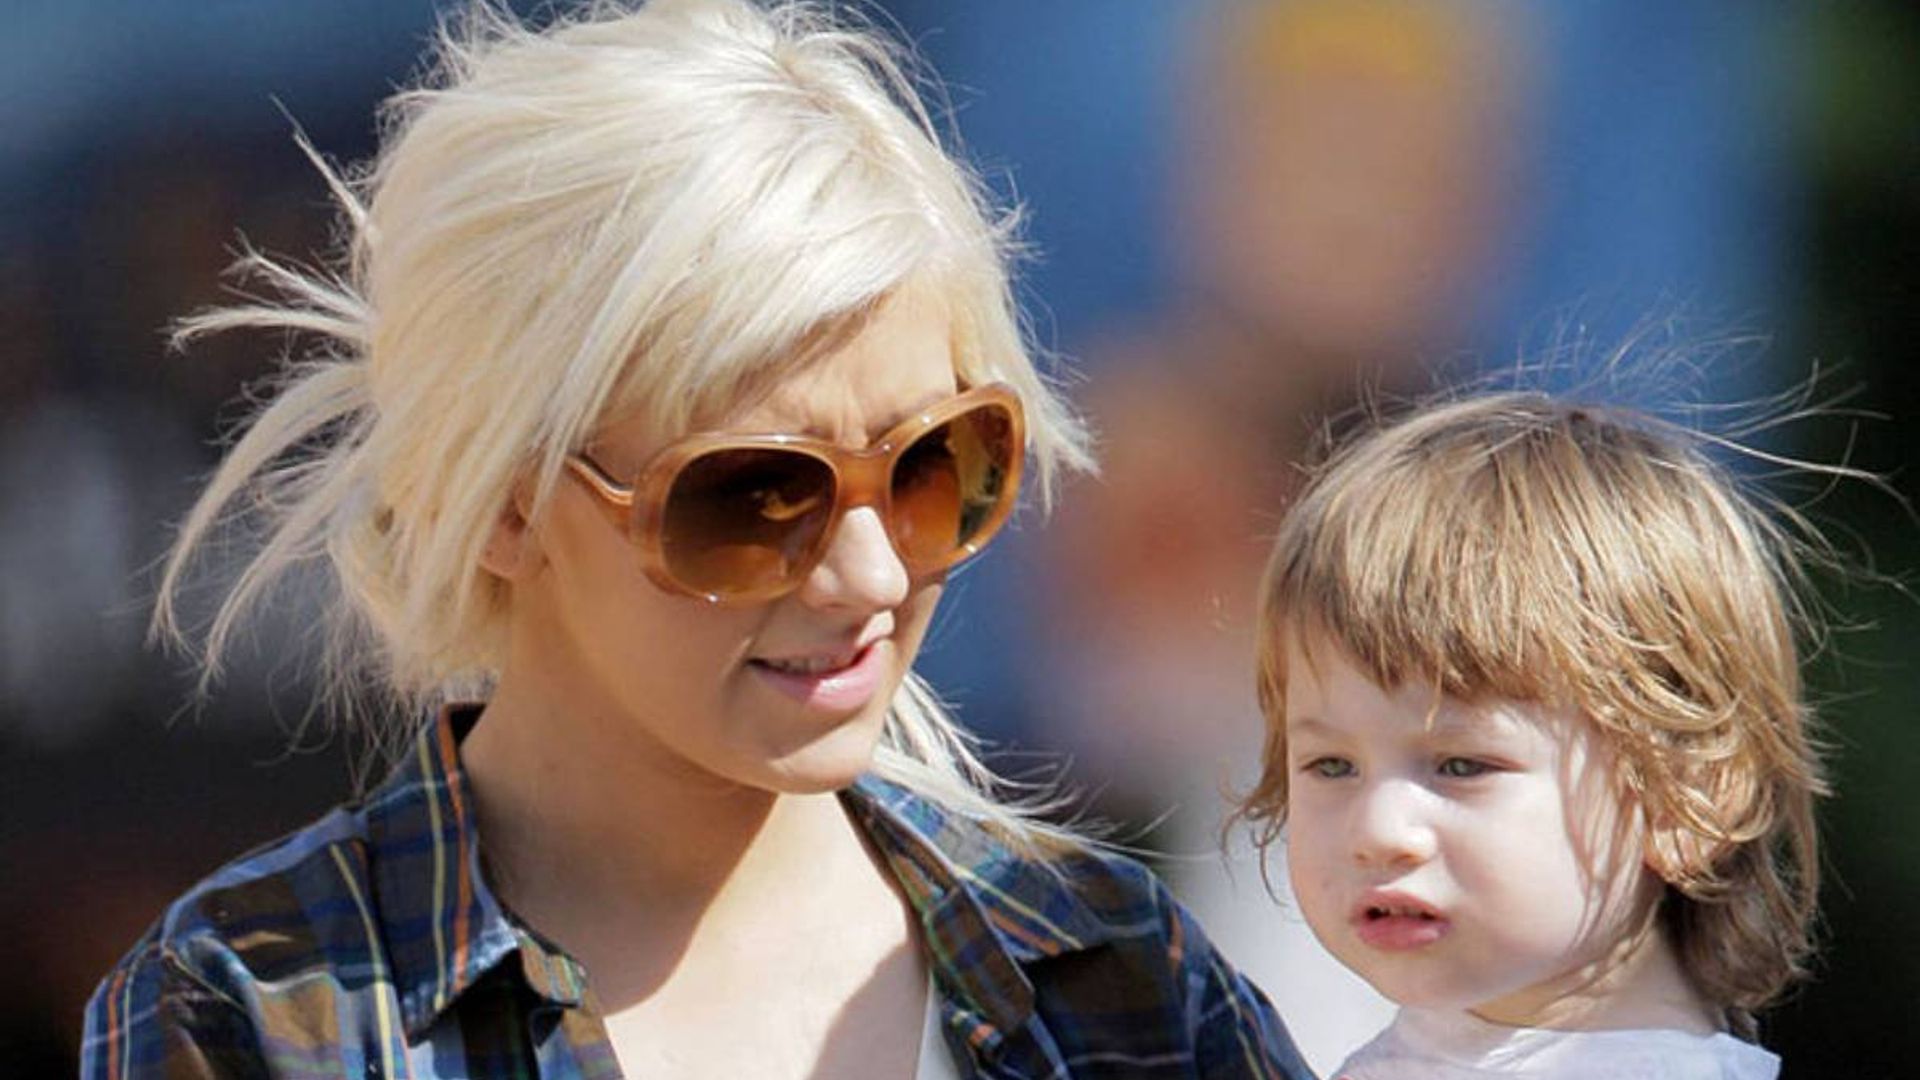 Christina Aguilera shares rare photo of son - and he's so grown up